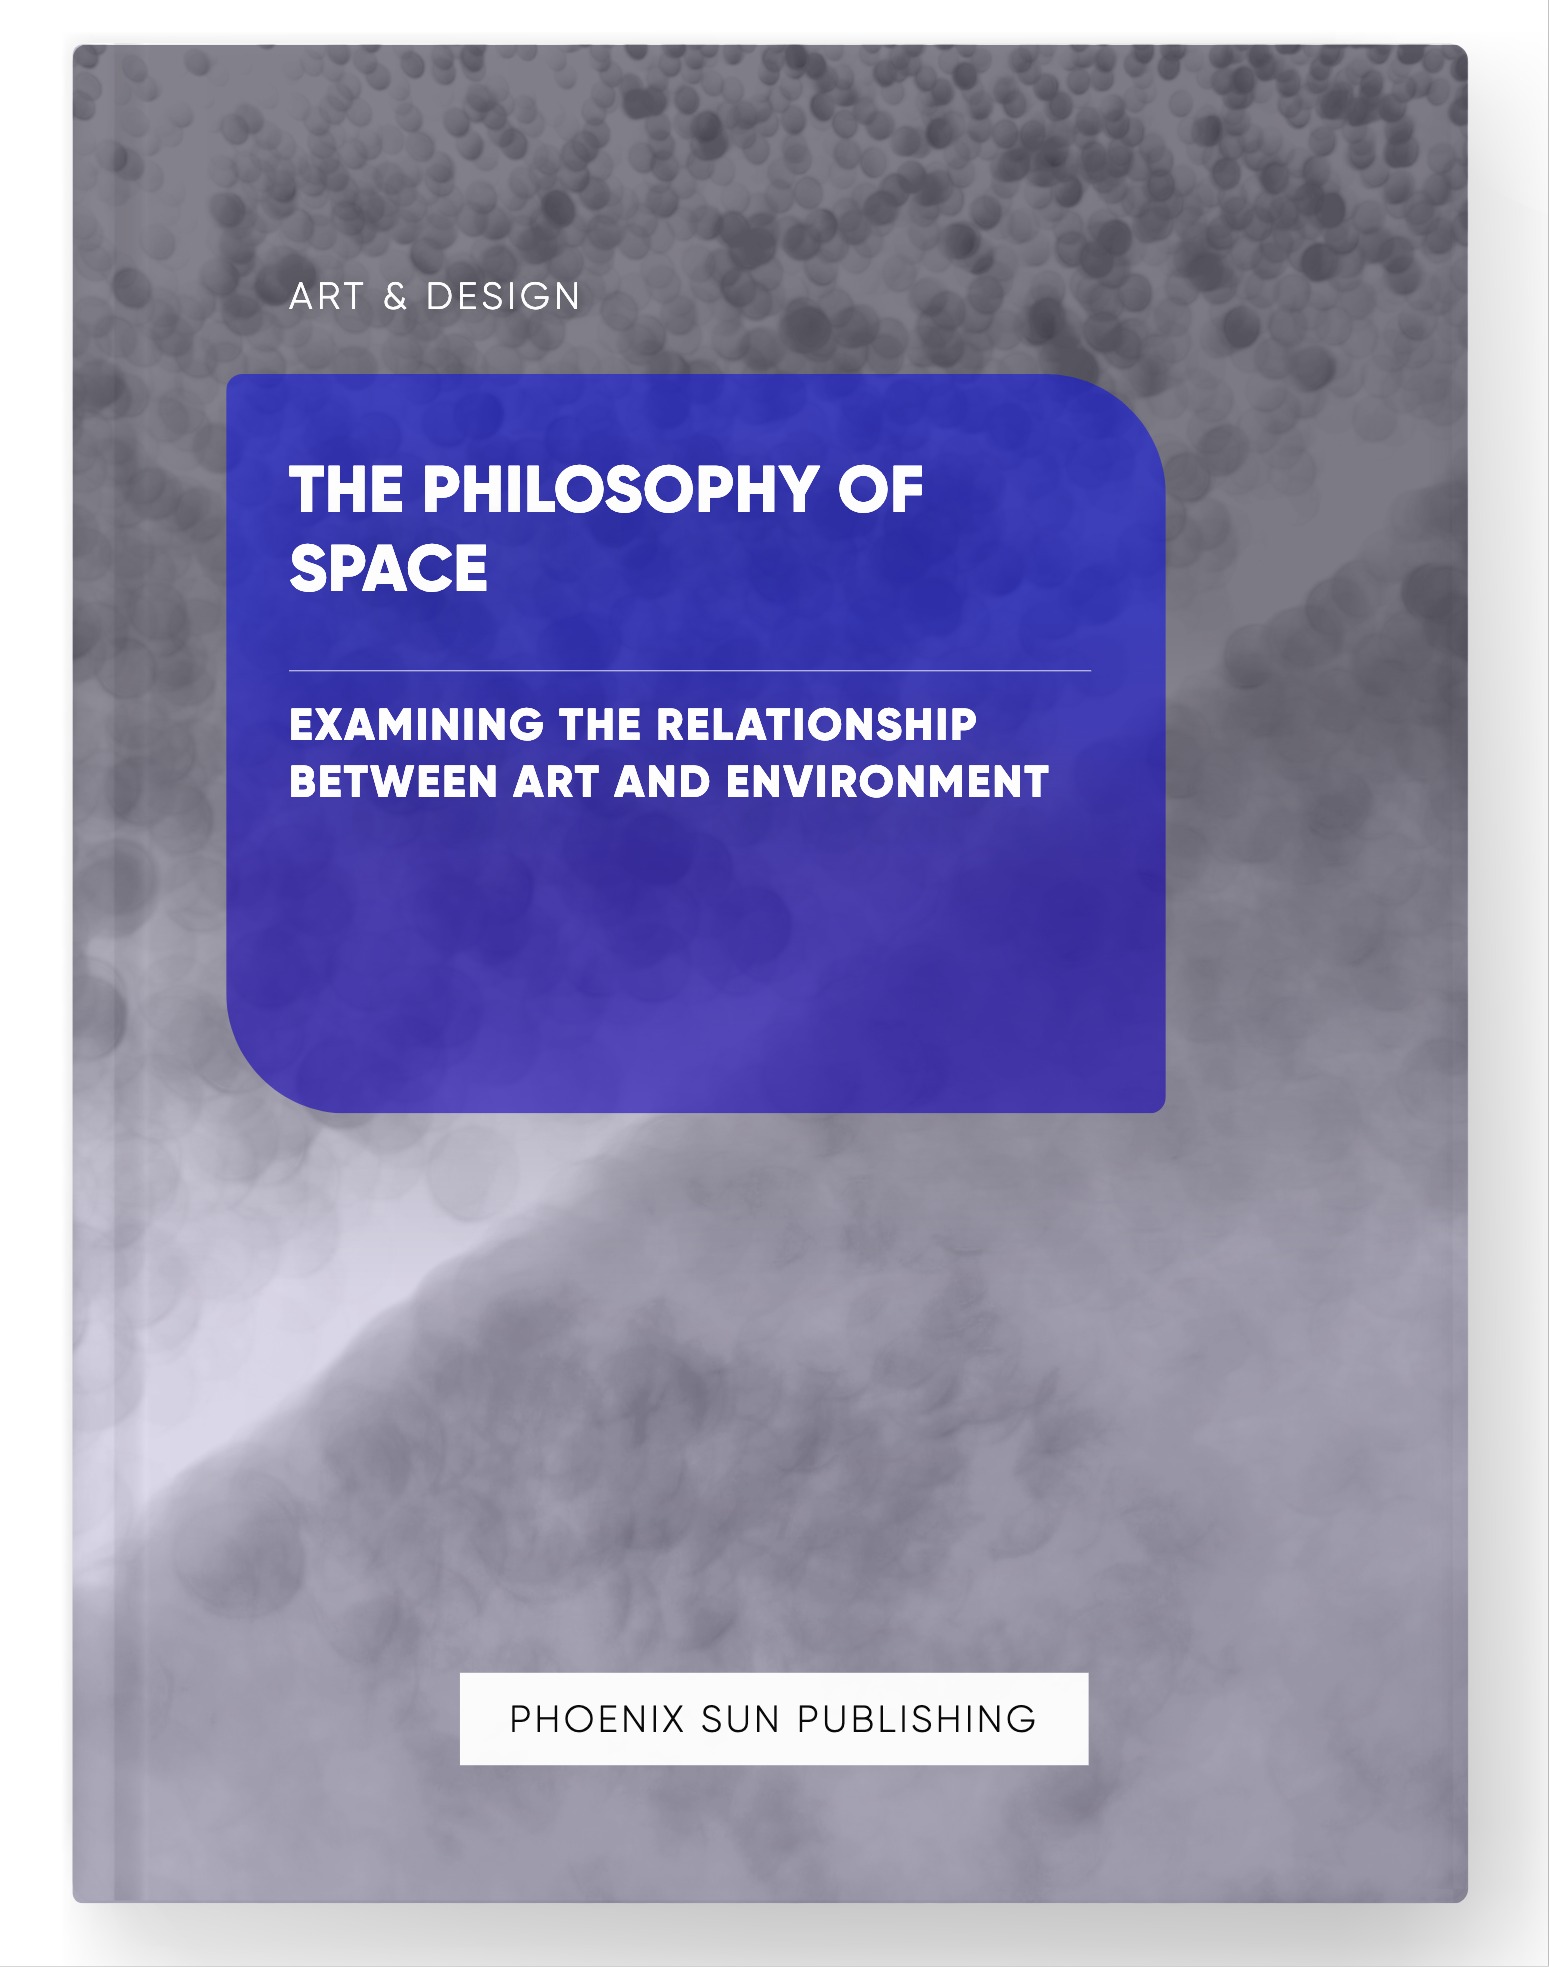 The Philosophy of Space – Examining the Relationship Between Art and Environment